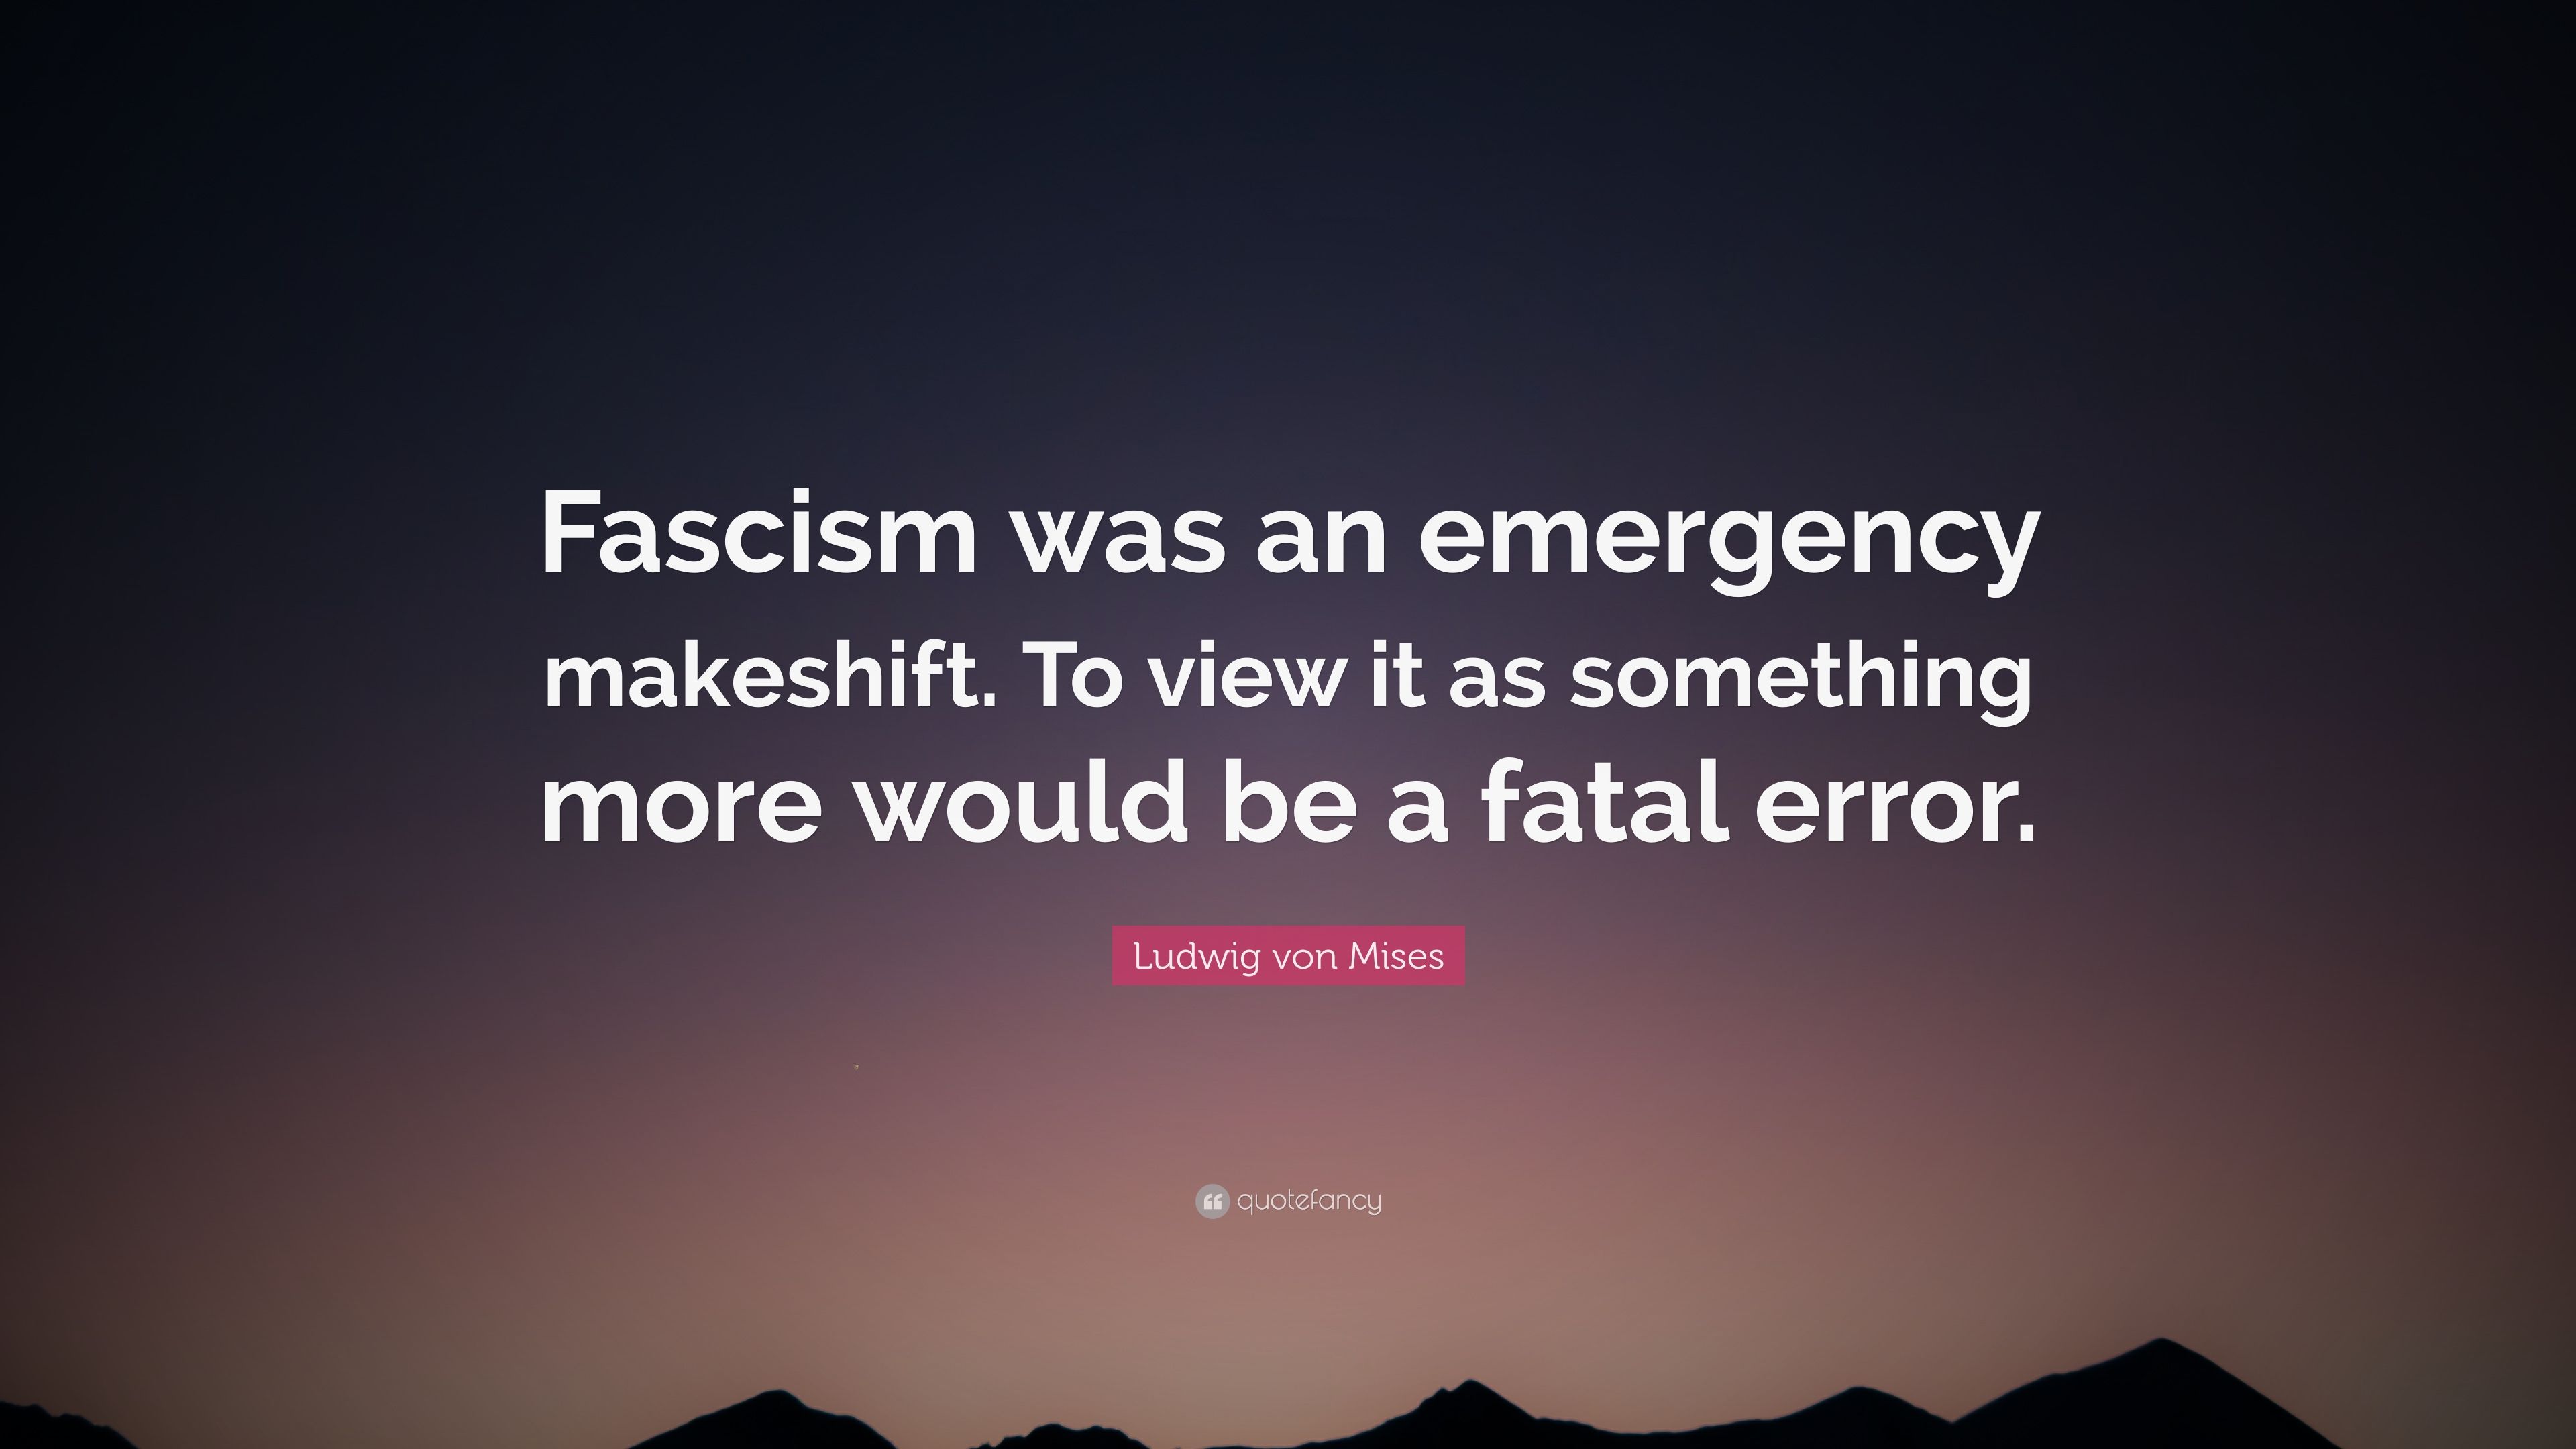 Ludwig von Mises Quote: “Fascism was an emergency makeshift. To